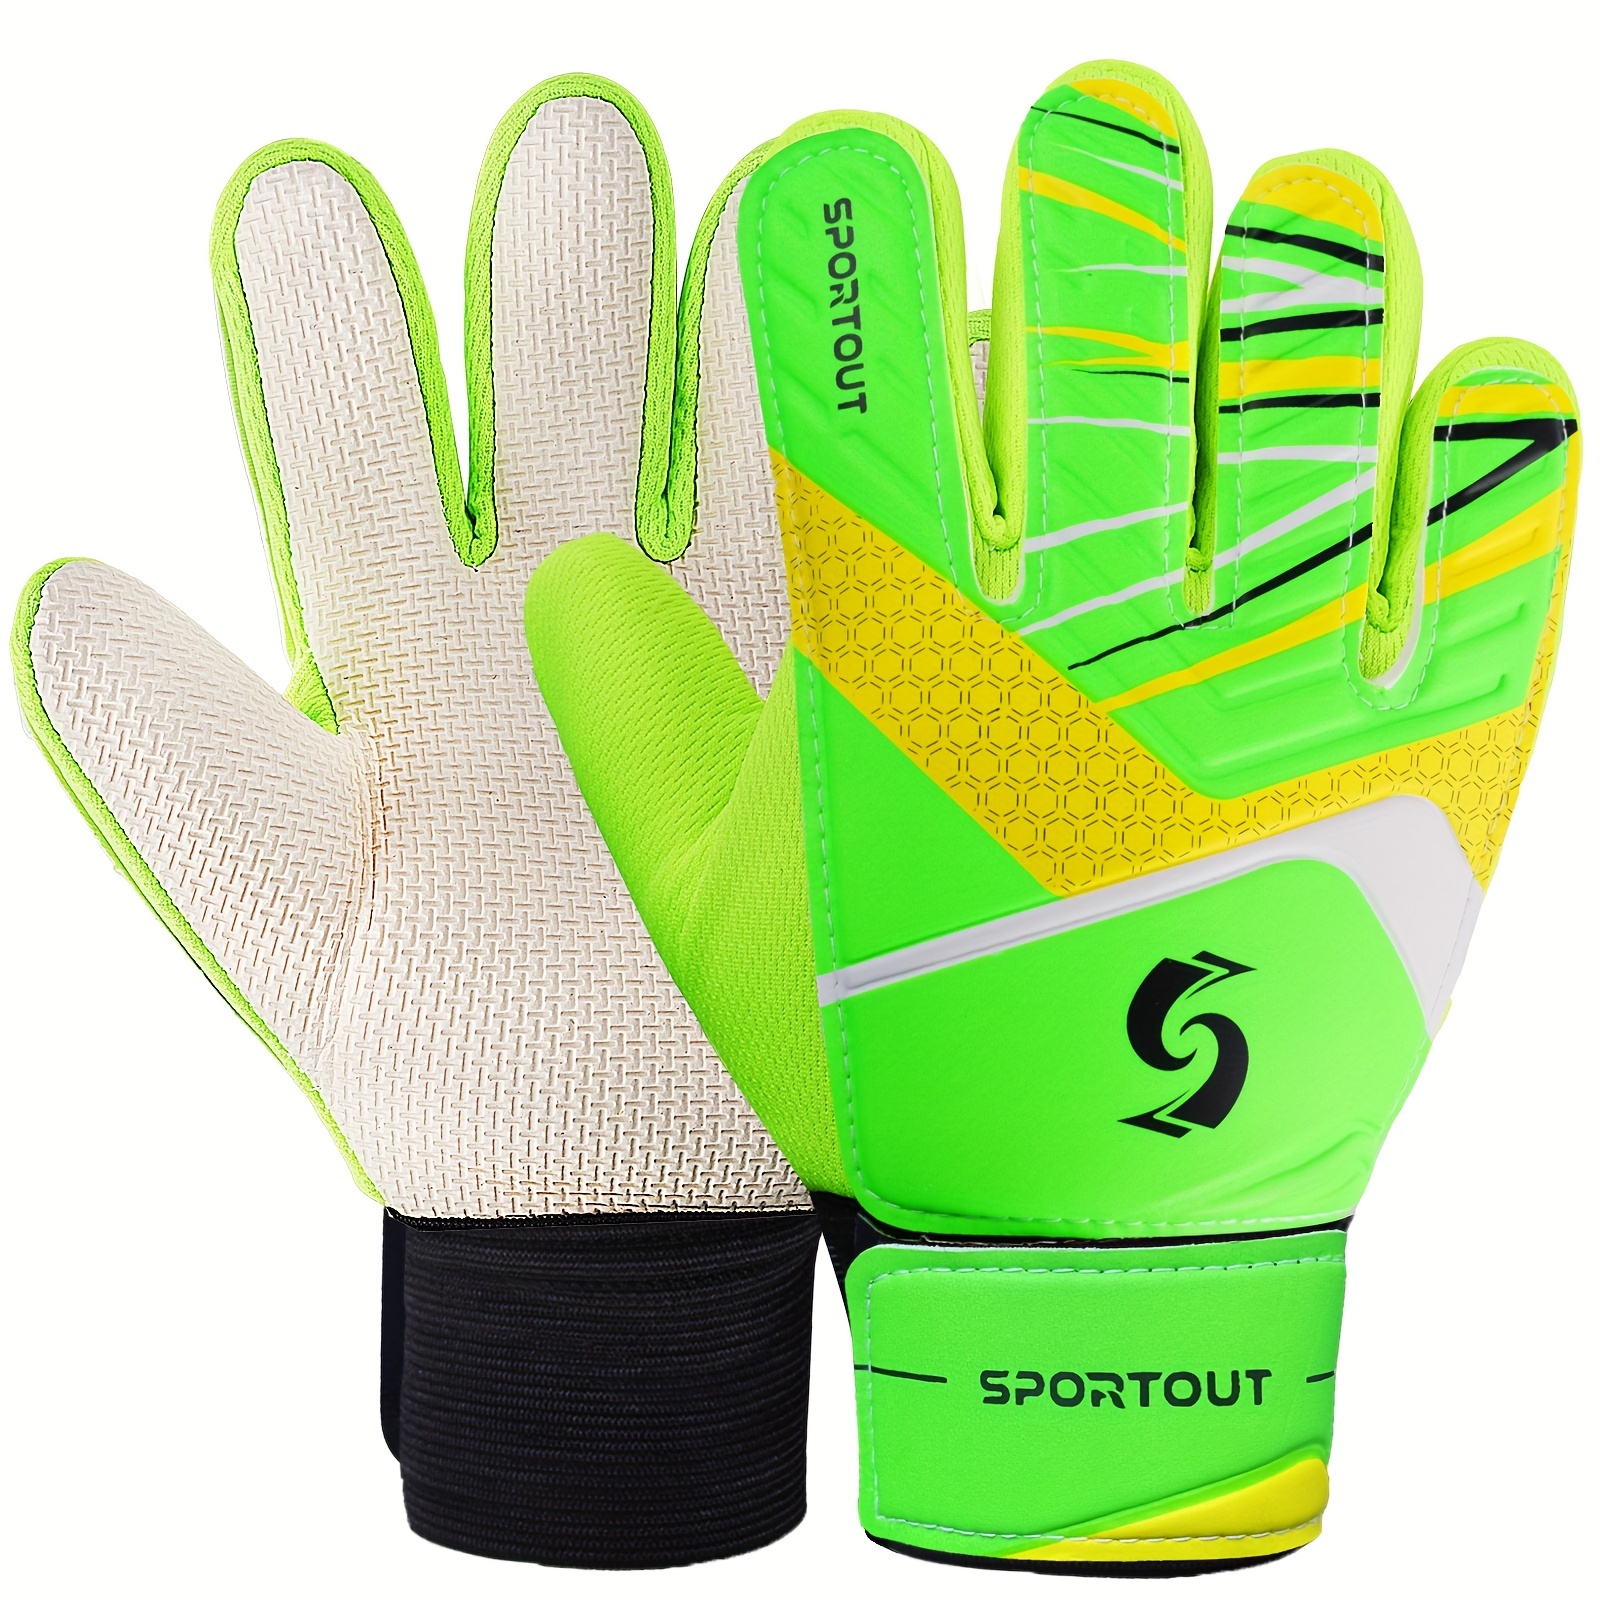 

Goalkeeper Gloves, Soccer Gloves With Double Wrist Protection, Non-slip Wear Resistant Latex Gloves For Training